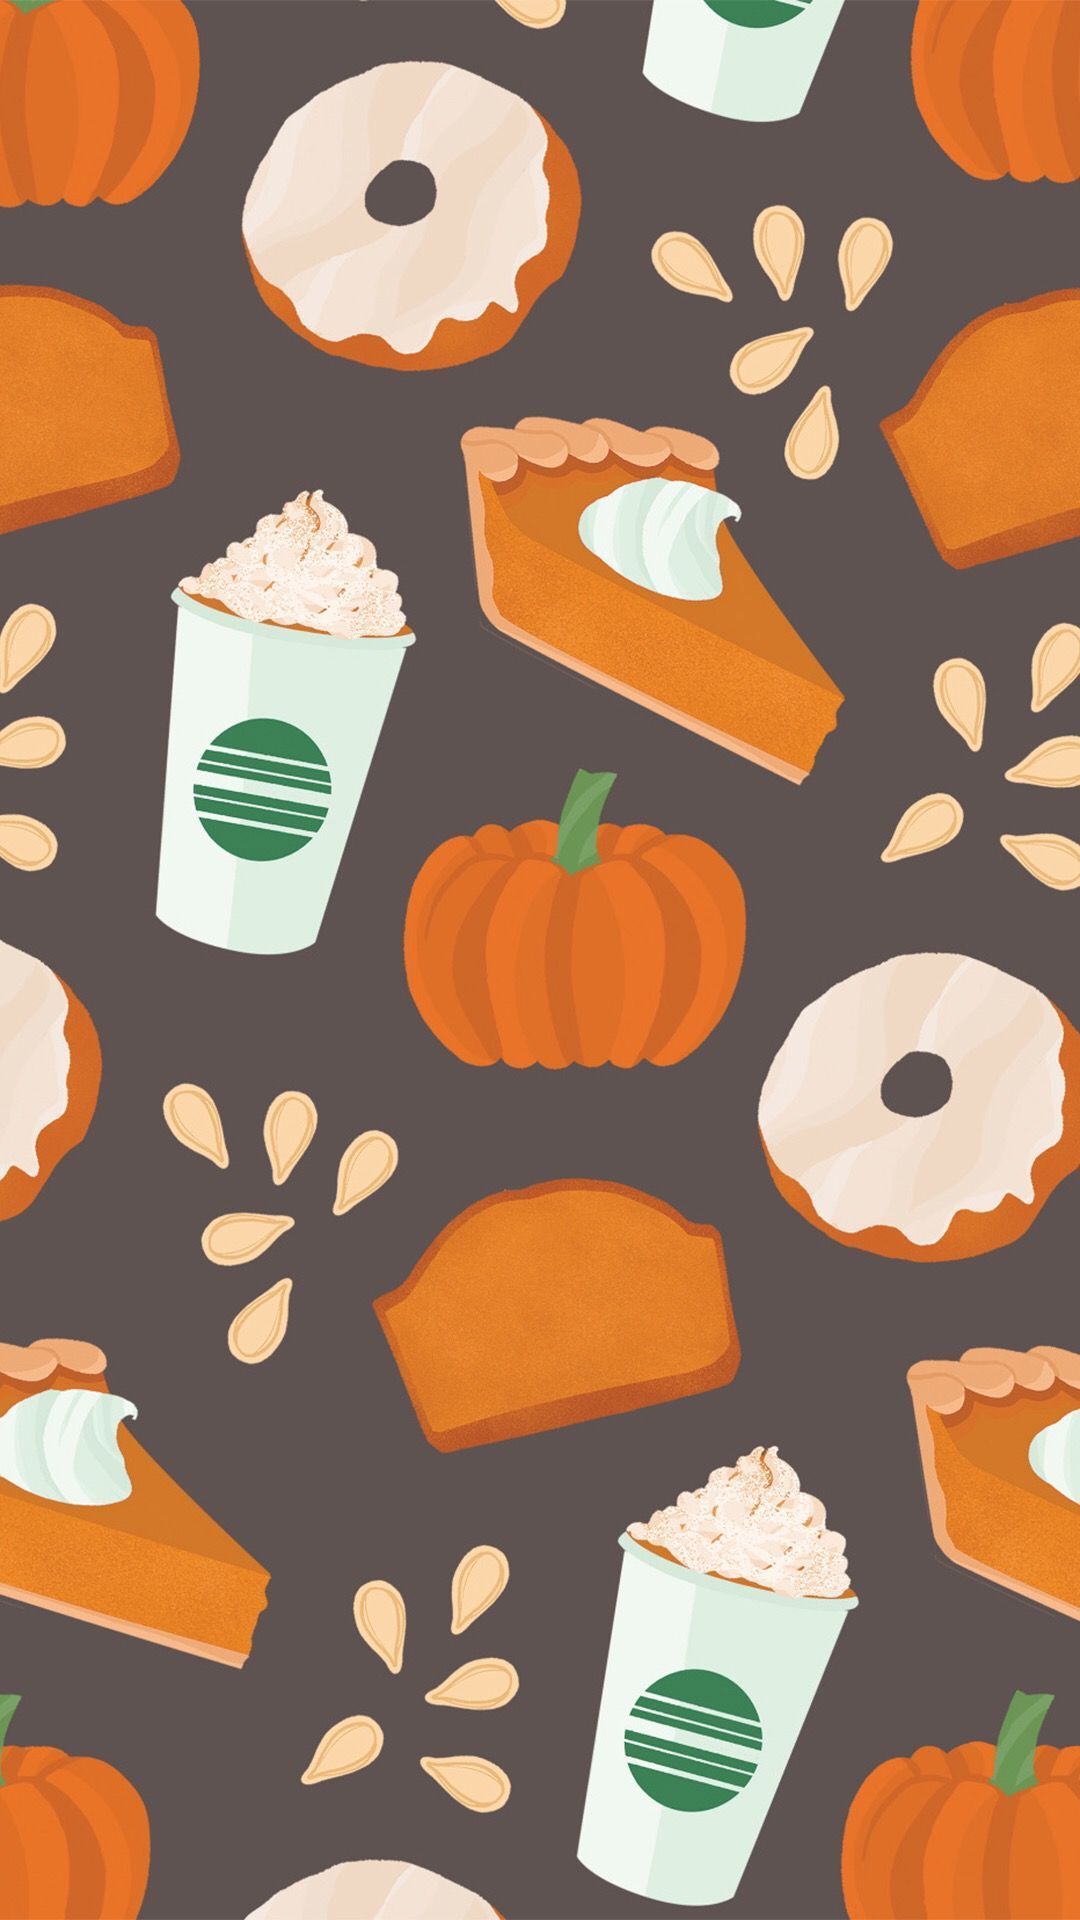 Starbucks Pumpkin Spice wallpaper for iPhone and Android phone. - Cute fall